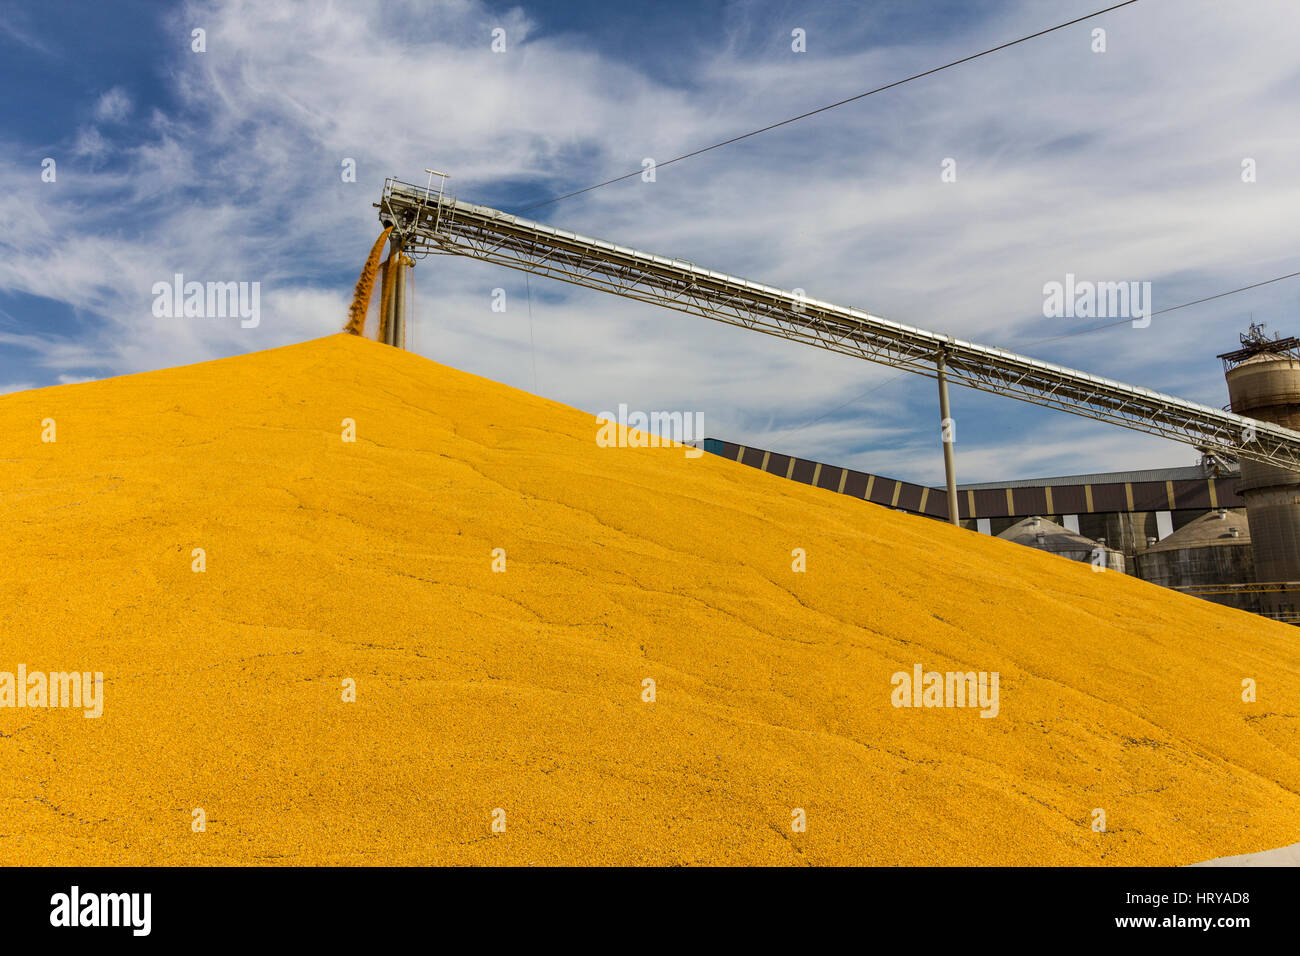 Corn and Grain Handling or Harvesting Terminal. Corn Can be Used for Food, Feed or Ethanol II Stock Photo